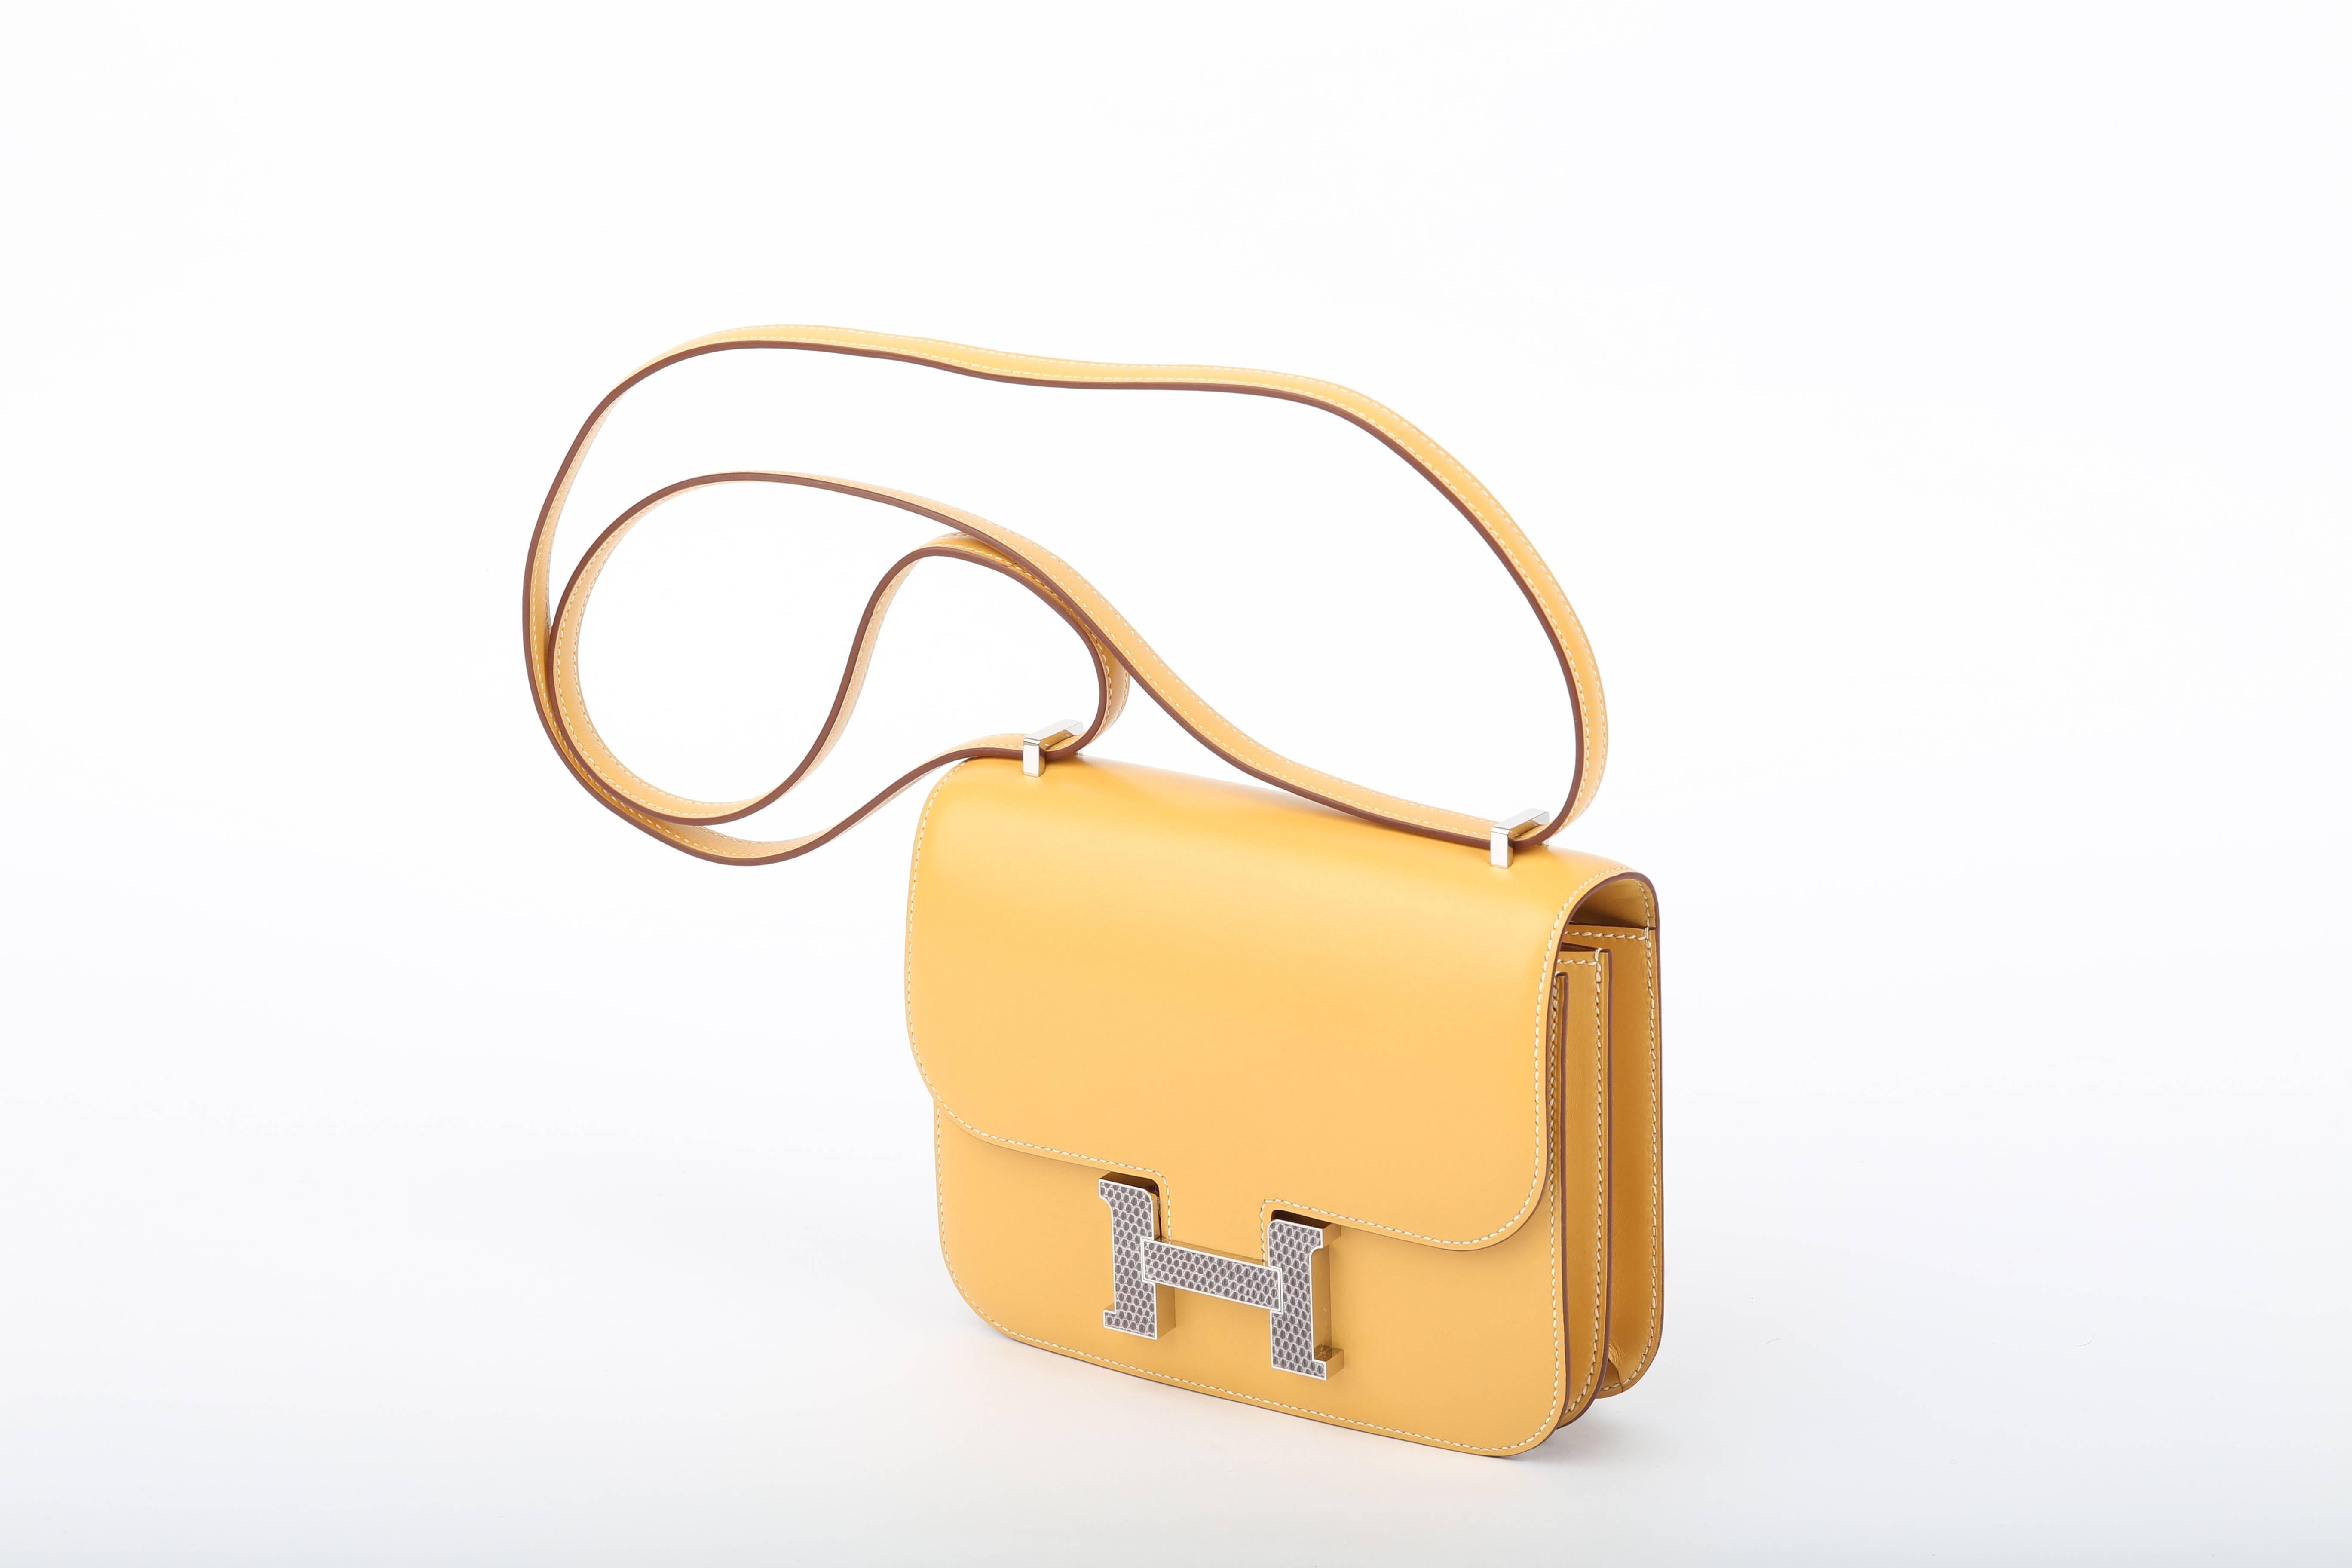 Hermes Constance Mini/ 18 cm  is one of the most appreciated collector’s items on the market.

This  Hermes Constance is a limited edition bag with white stitching and a buckle made from lizard skin in palladium hardware! 

One of a kind!